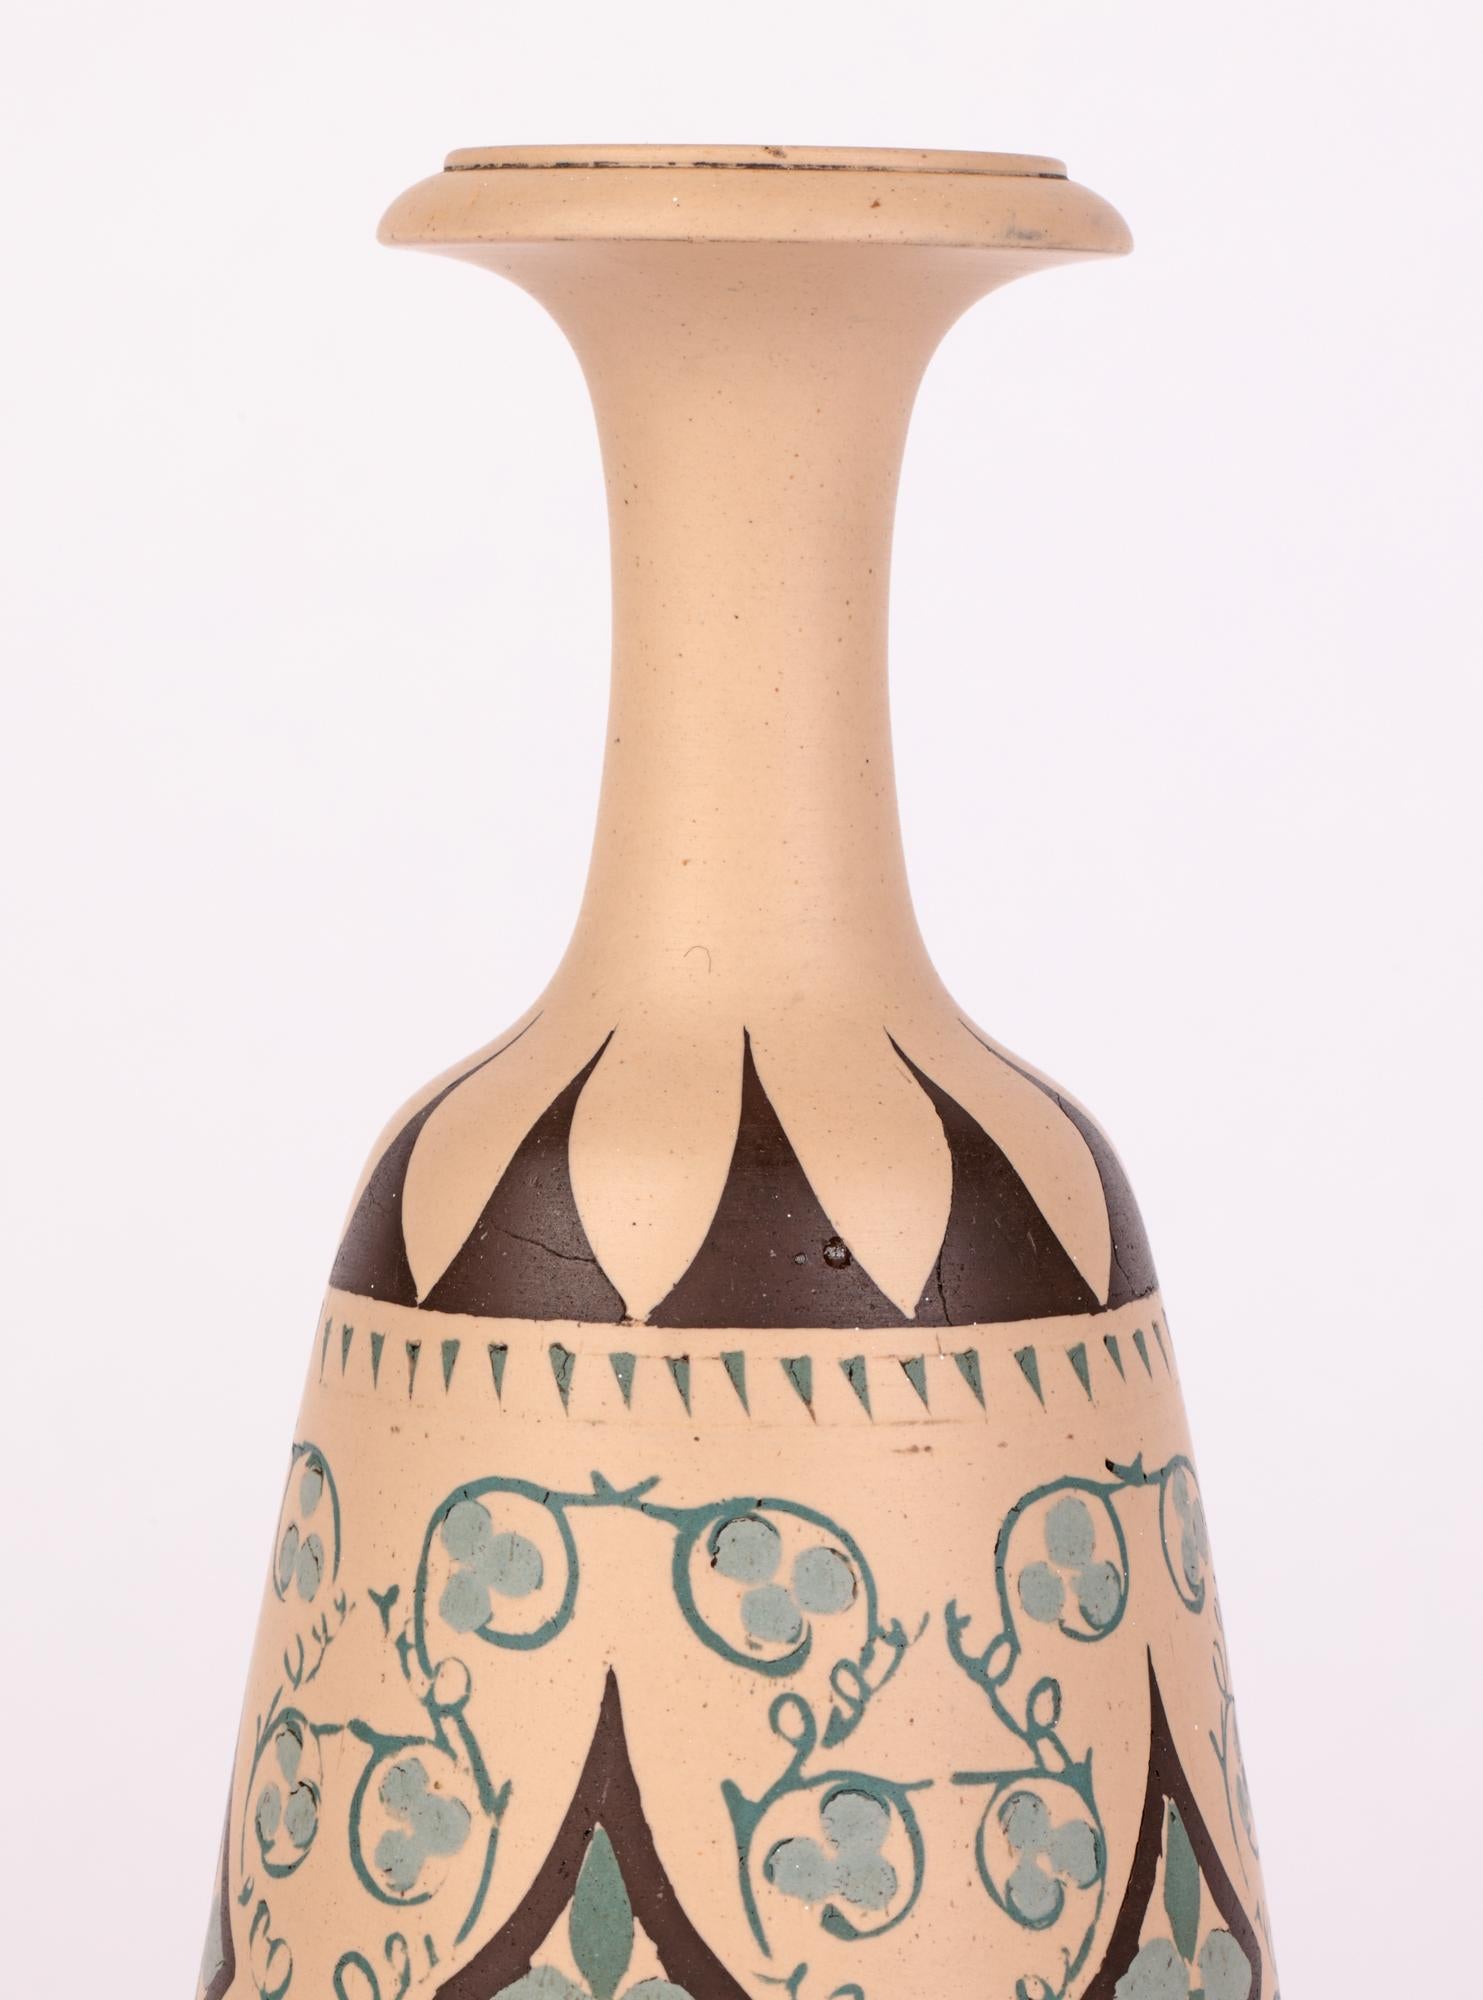 A very unusual Aesthetic Movement biscuit fired Doulton Lambeth stoneware vase pigment hand-painted with stylized foliage and geometric designs by Minnie G Thompson and dated 1883. The tall vase stands on a wide round pedestal foot with a tapering